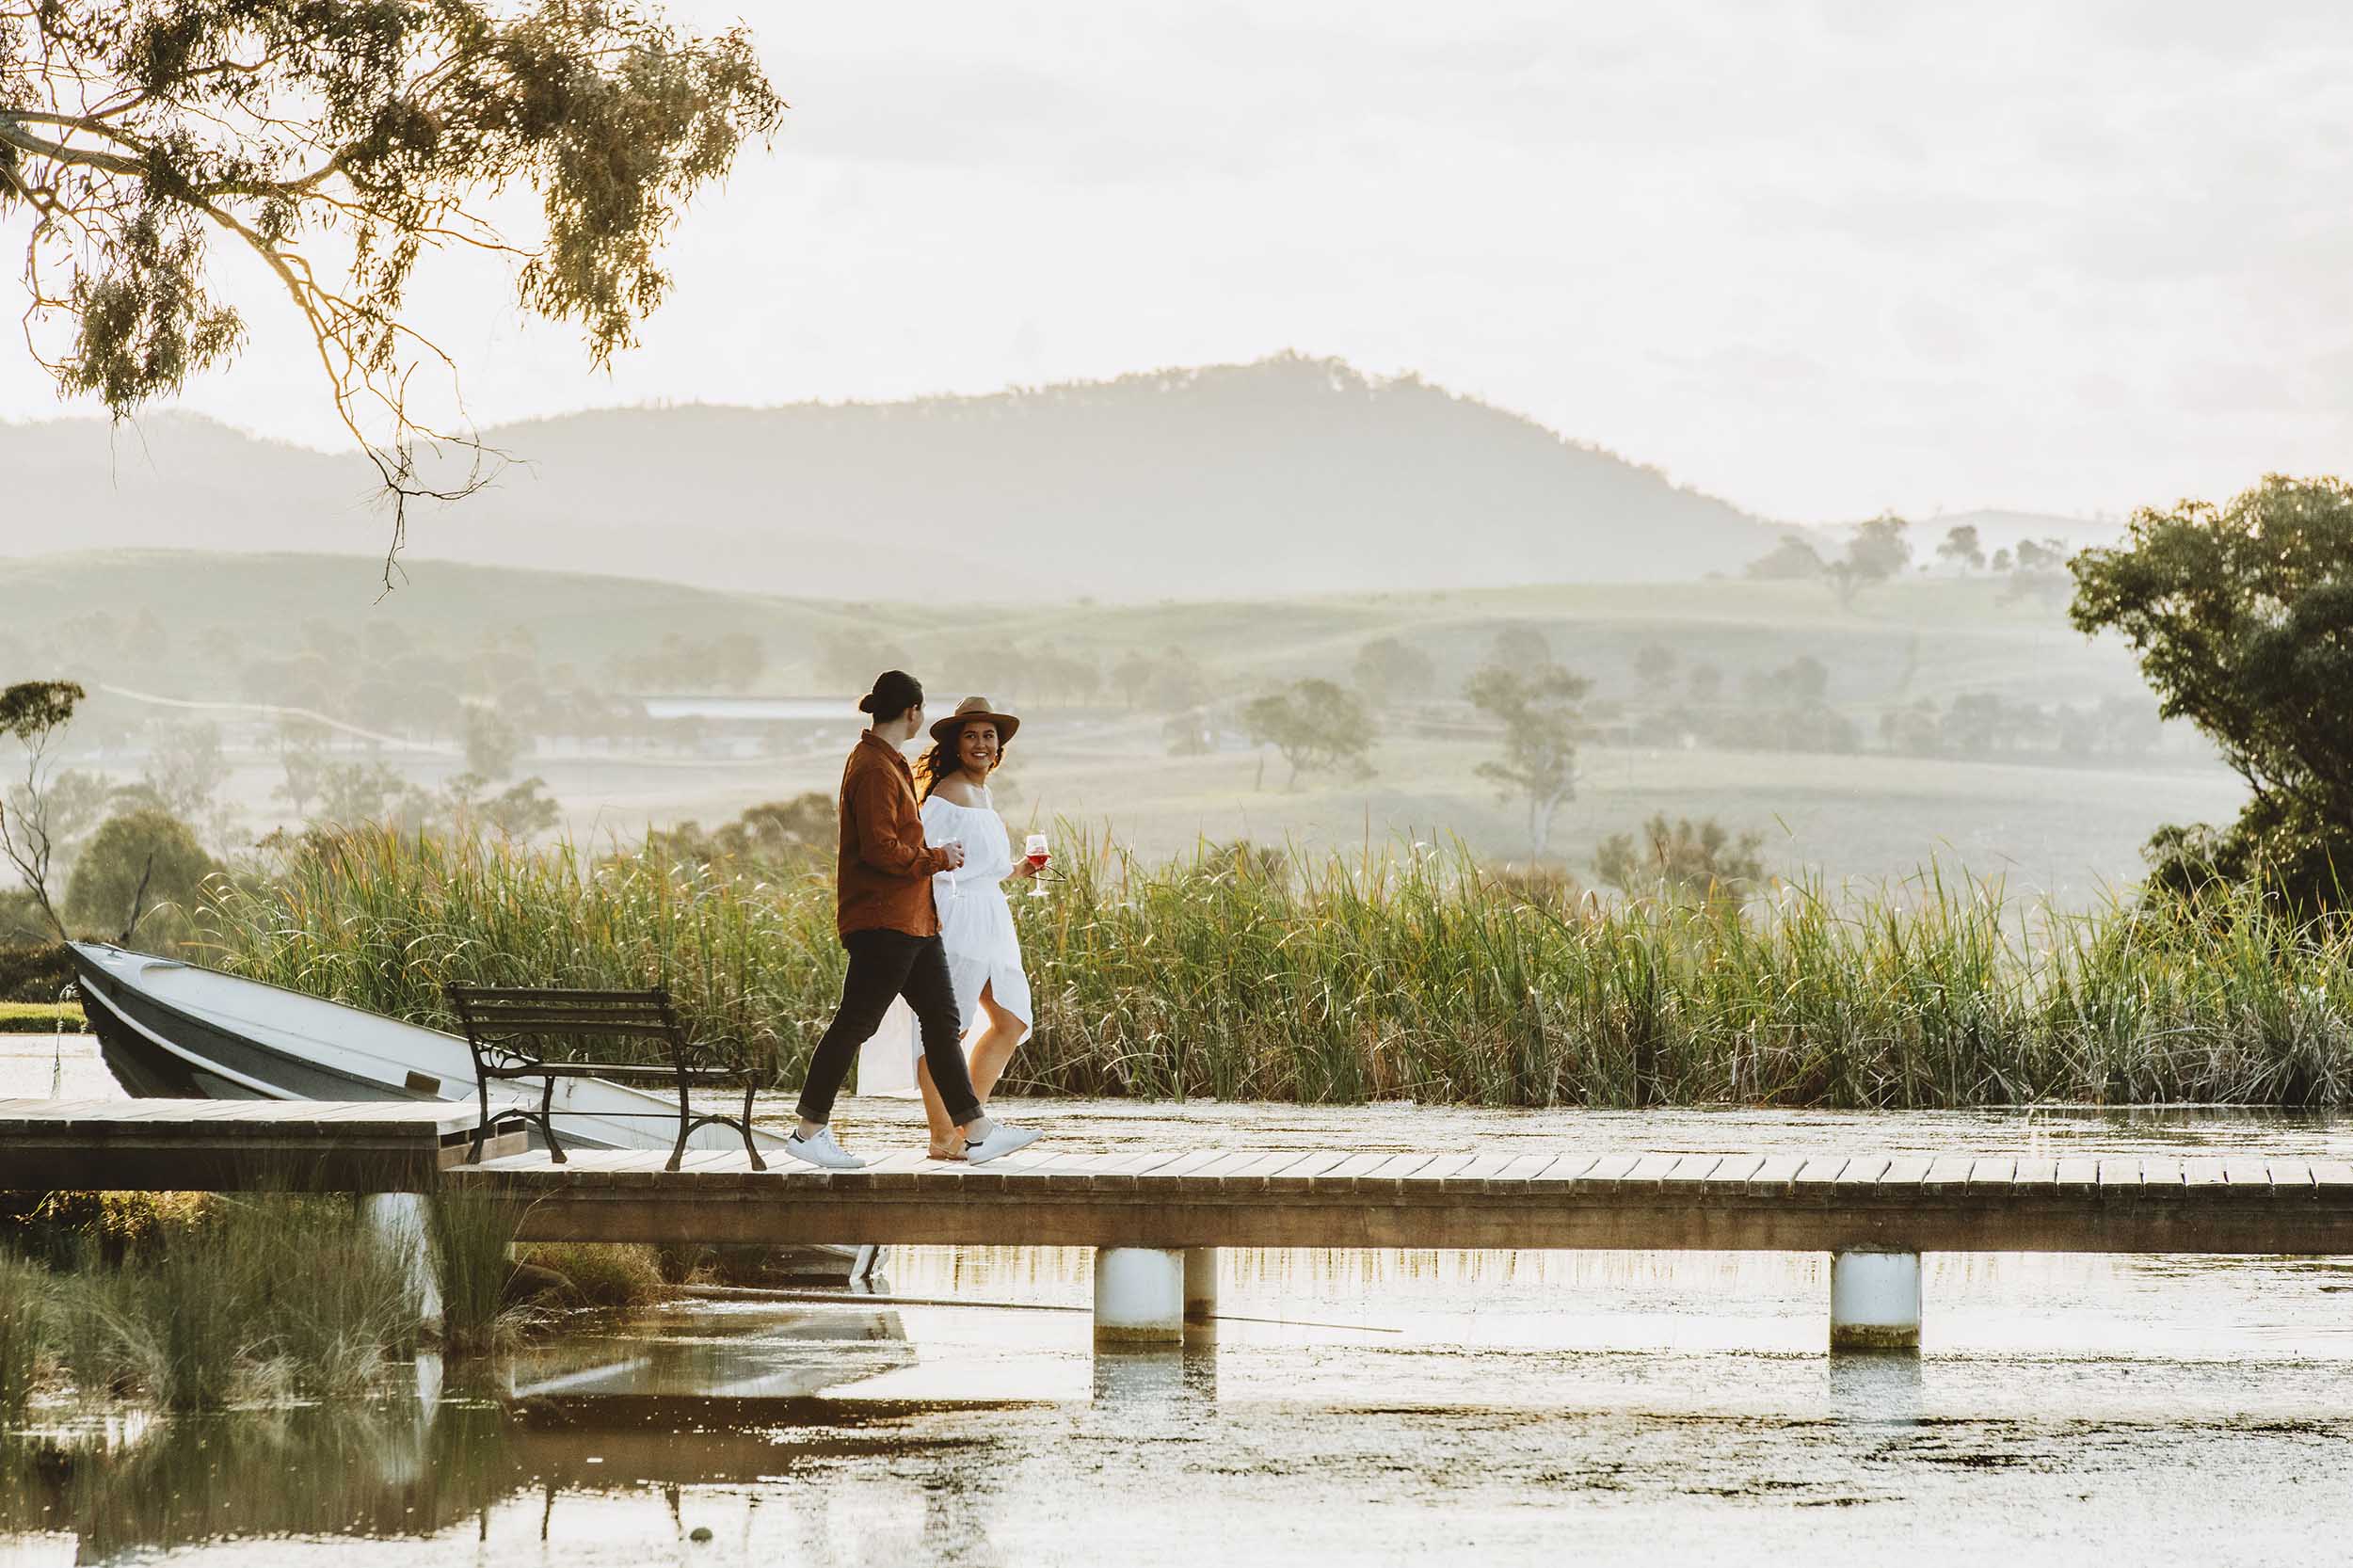 Luxury eco-glamping accommodation in Mudgee romantic getaway nsw